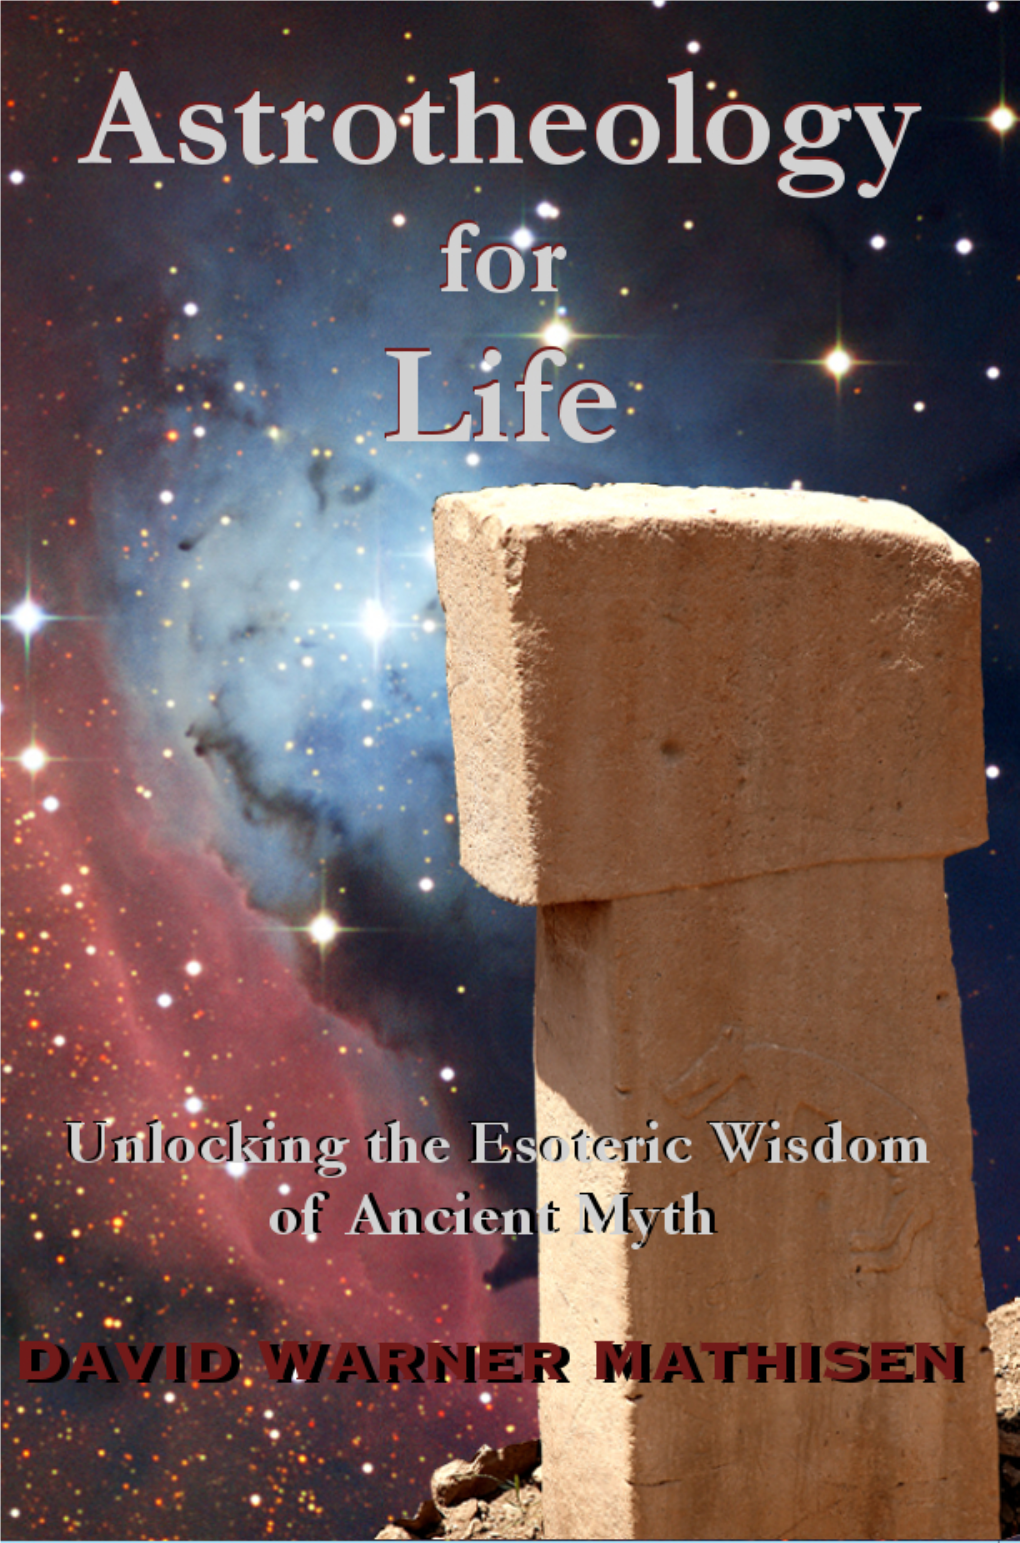 Astrotheology for Life: Unlocking the Esoteric Wisdom of Ancient Myth